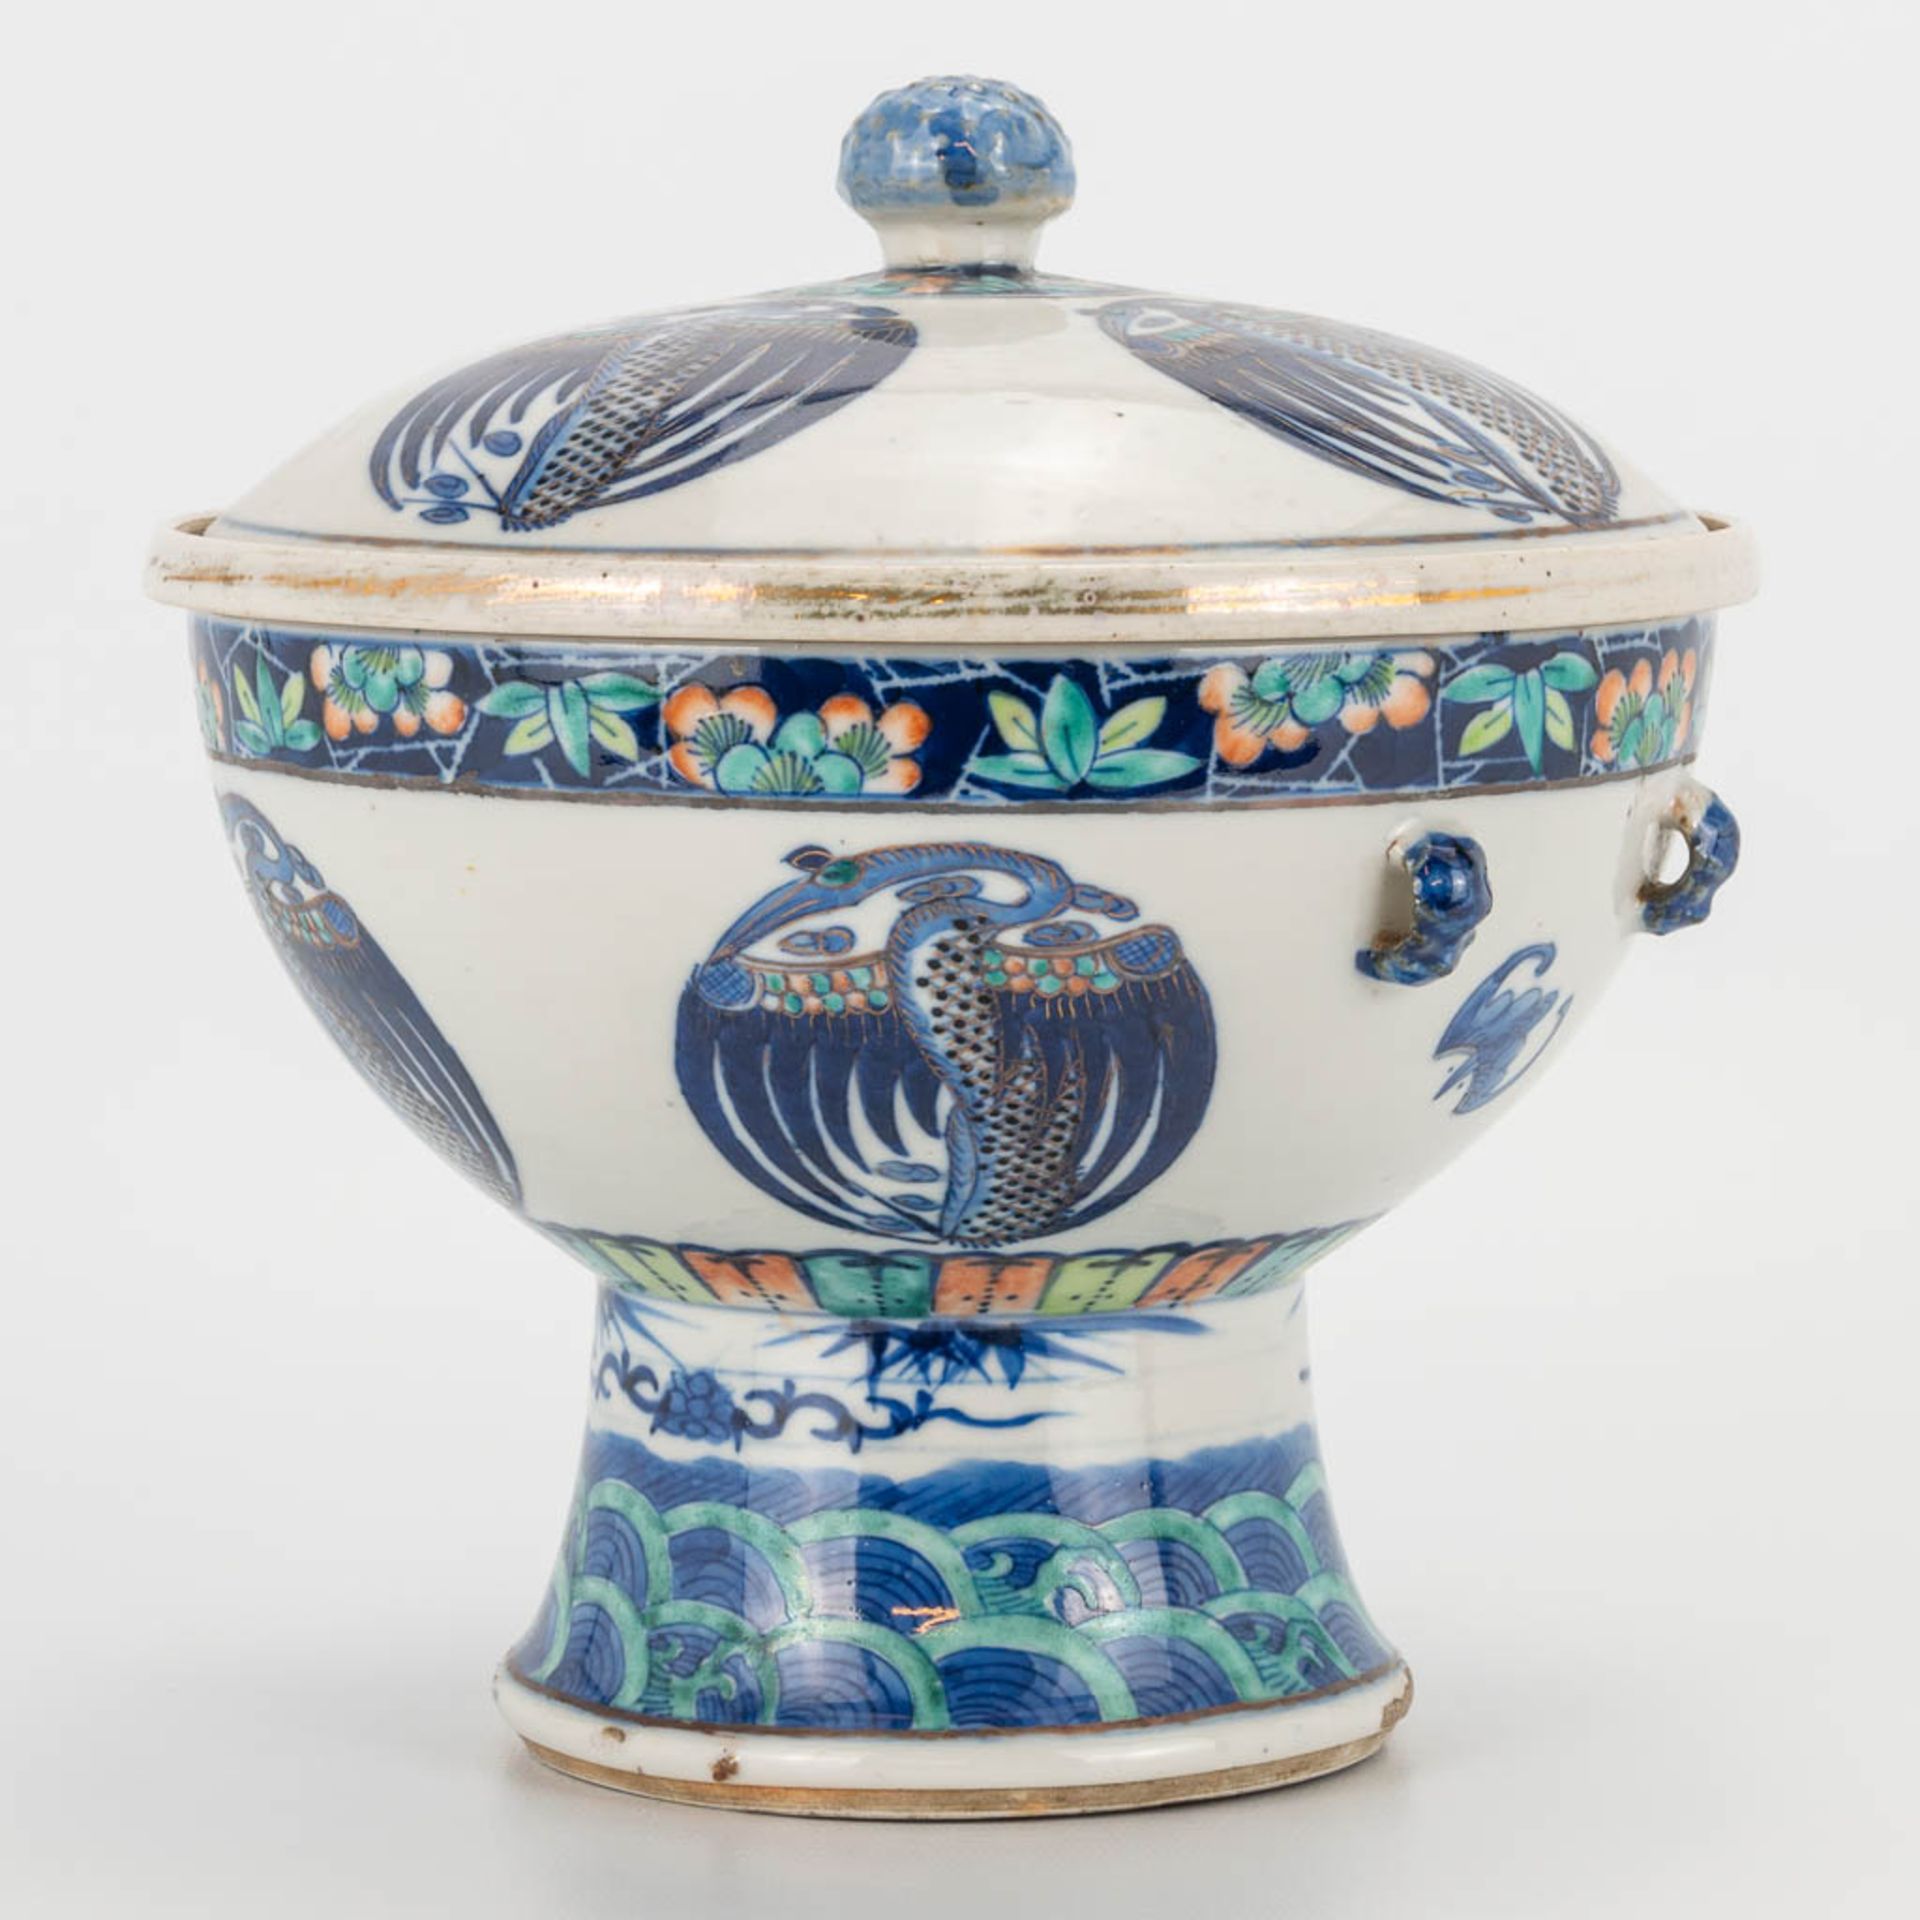 A 'Bain Marie' Douchai made of Chinese porcelain, Tching dinasty, 19th century.Ê (21 x 20 cm) - Image 9 of 16